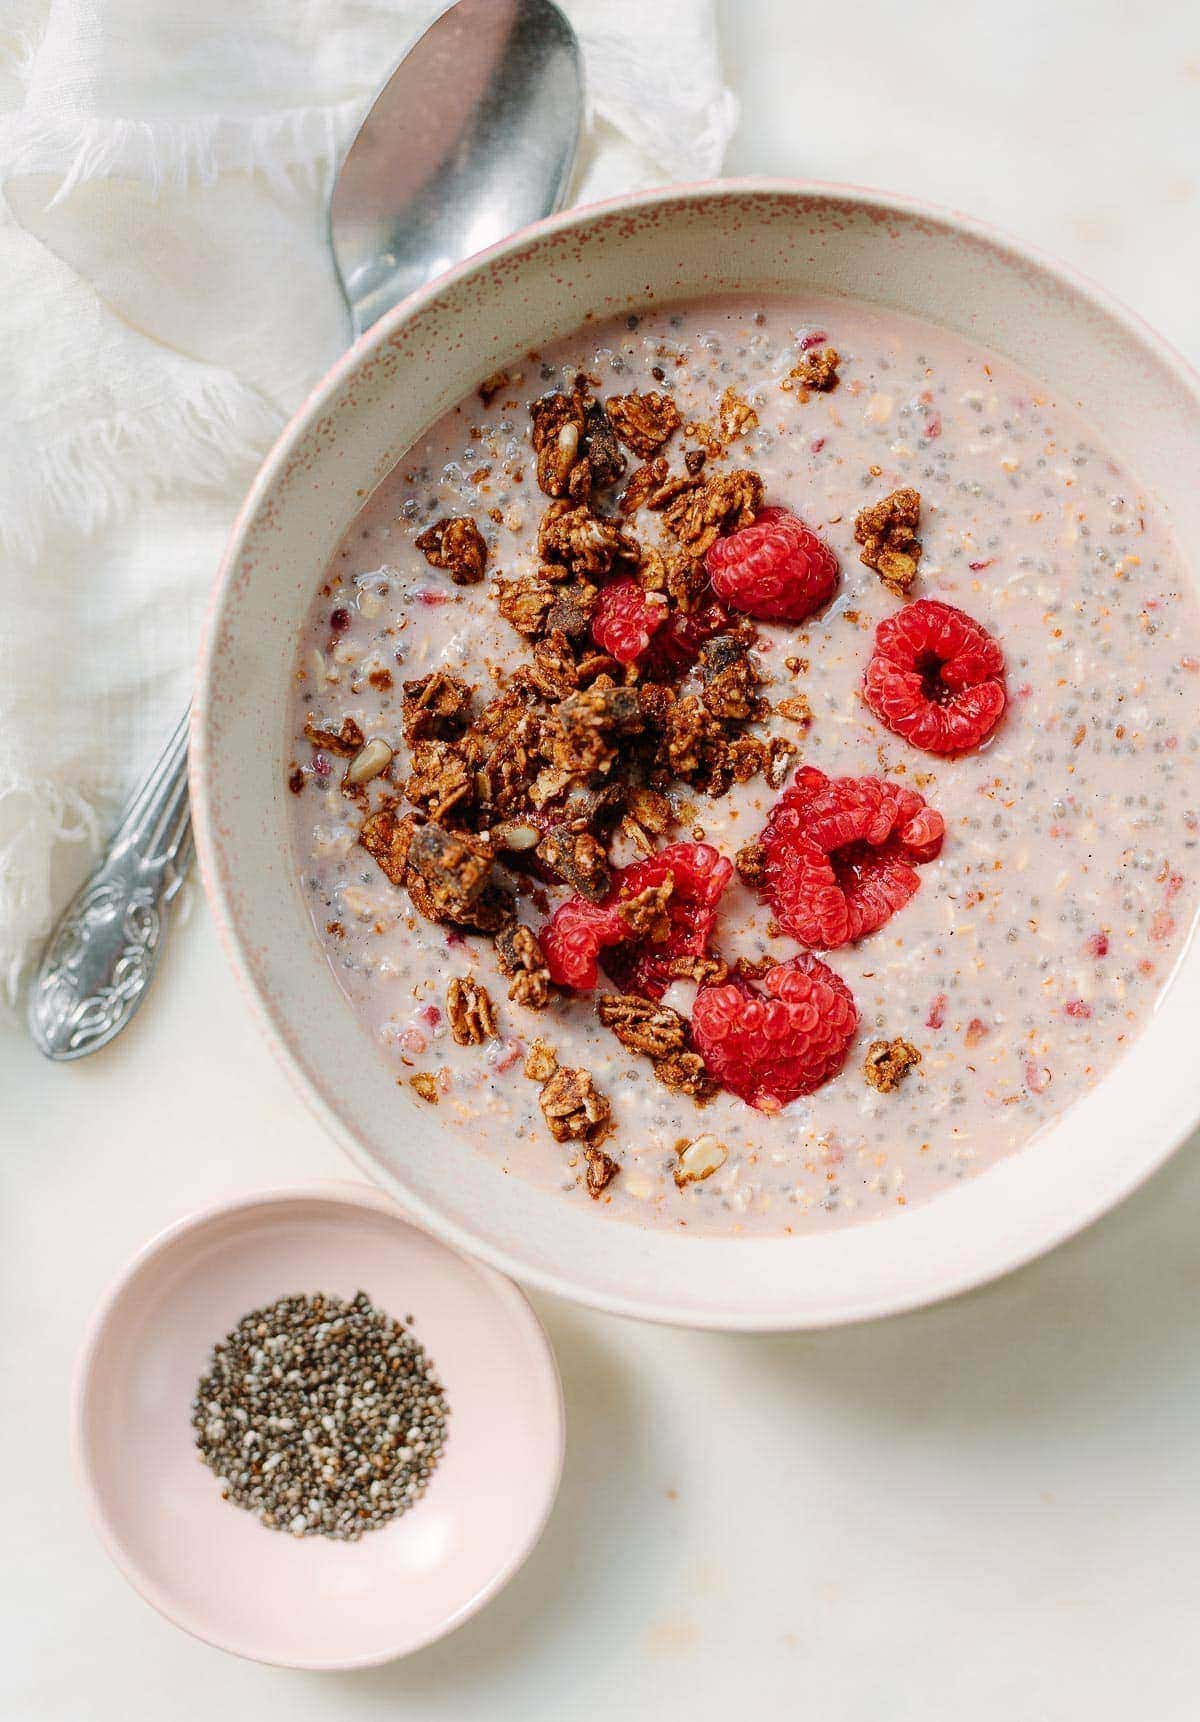 Raspberry Overnight Oats with Chocolate Granola by Family Style Food // FoodNouveau.com